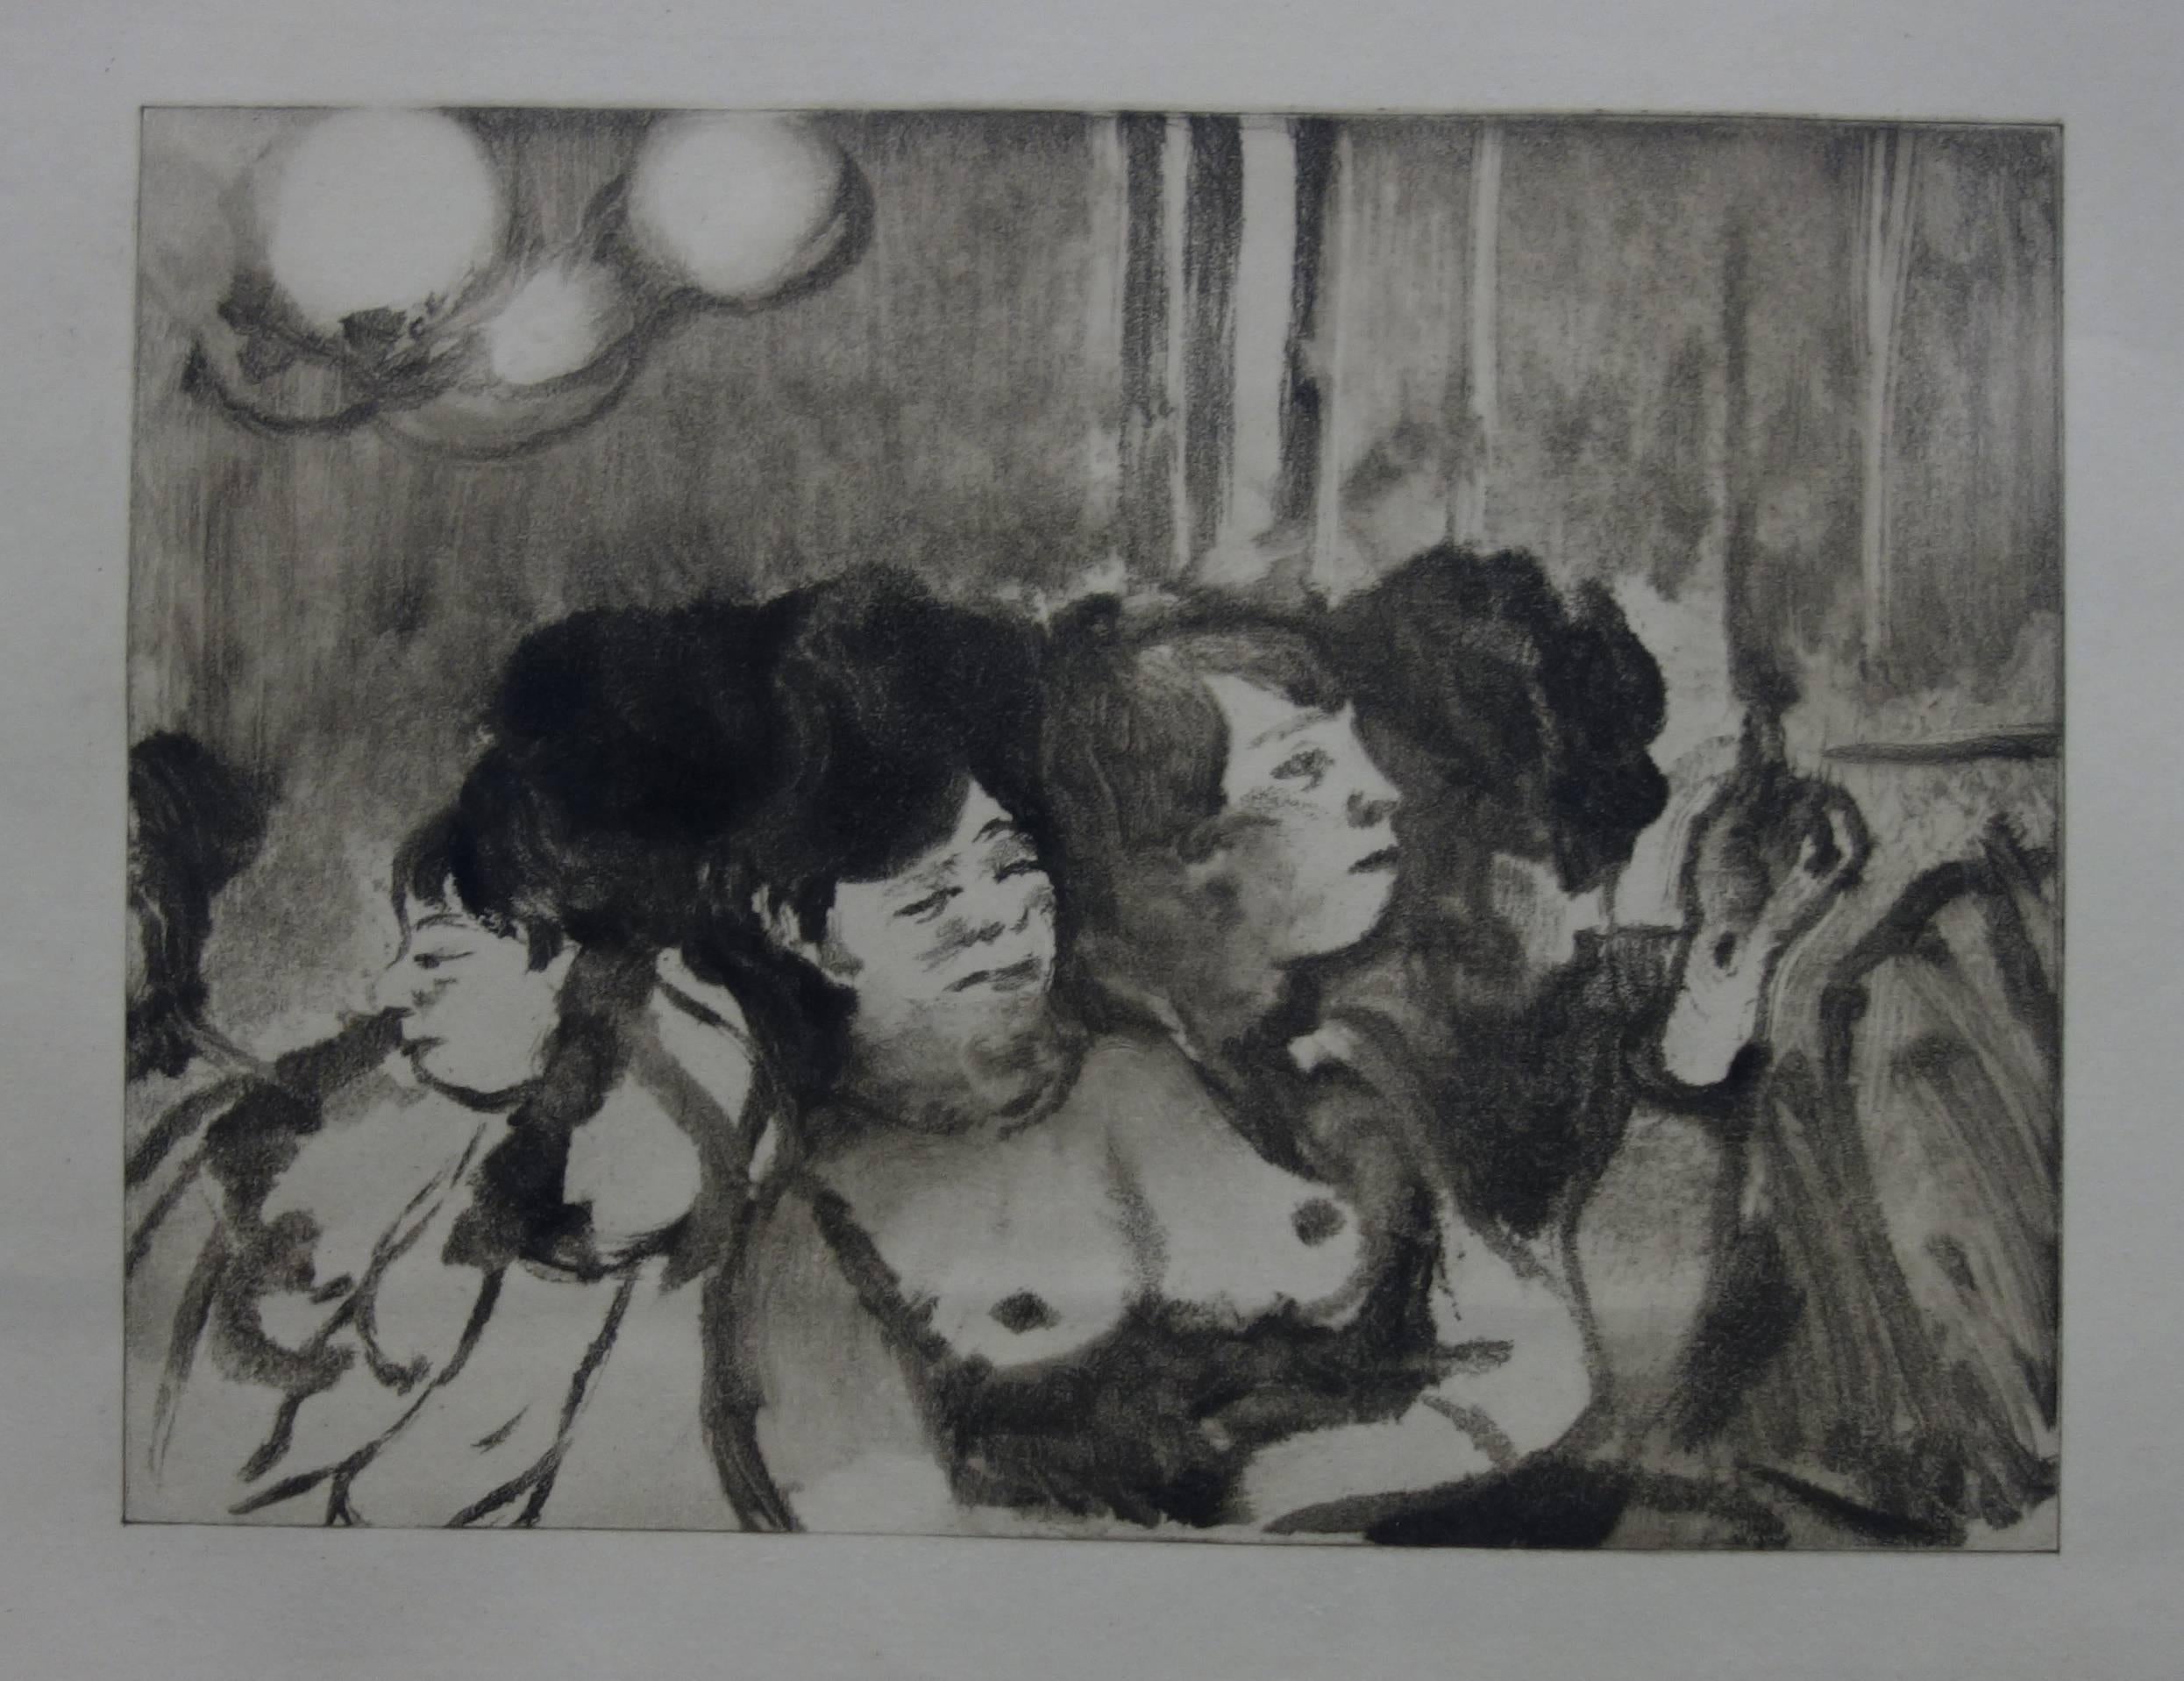 (after) Edgar Degas Figurative Print - Whorehouse Scene : A Group of Prostitutes  - Original etching